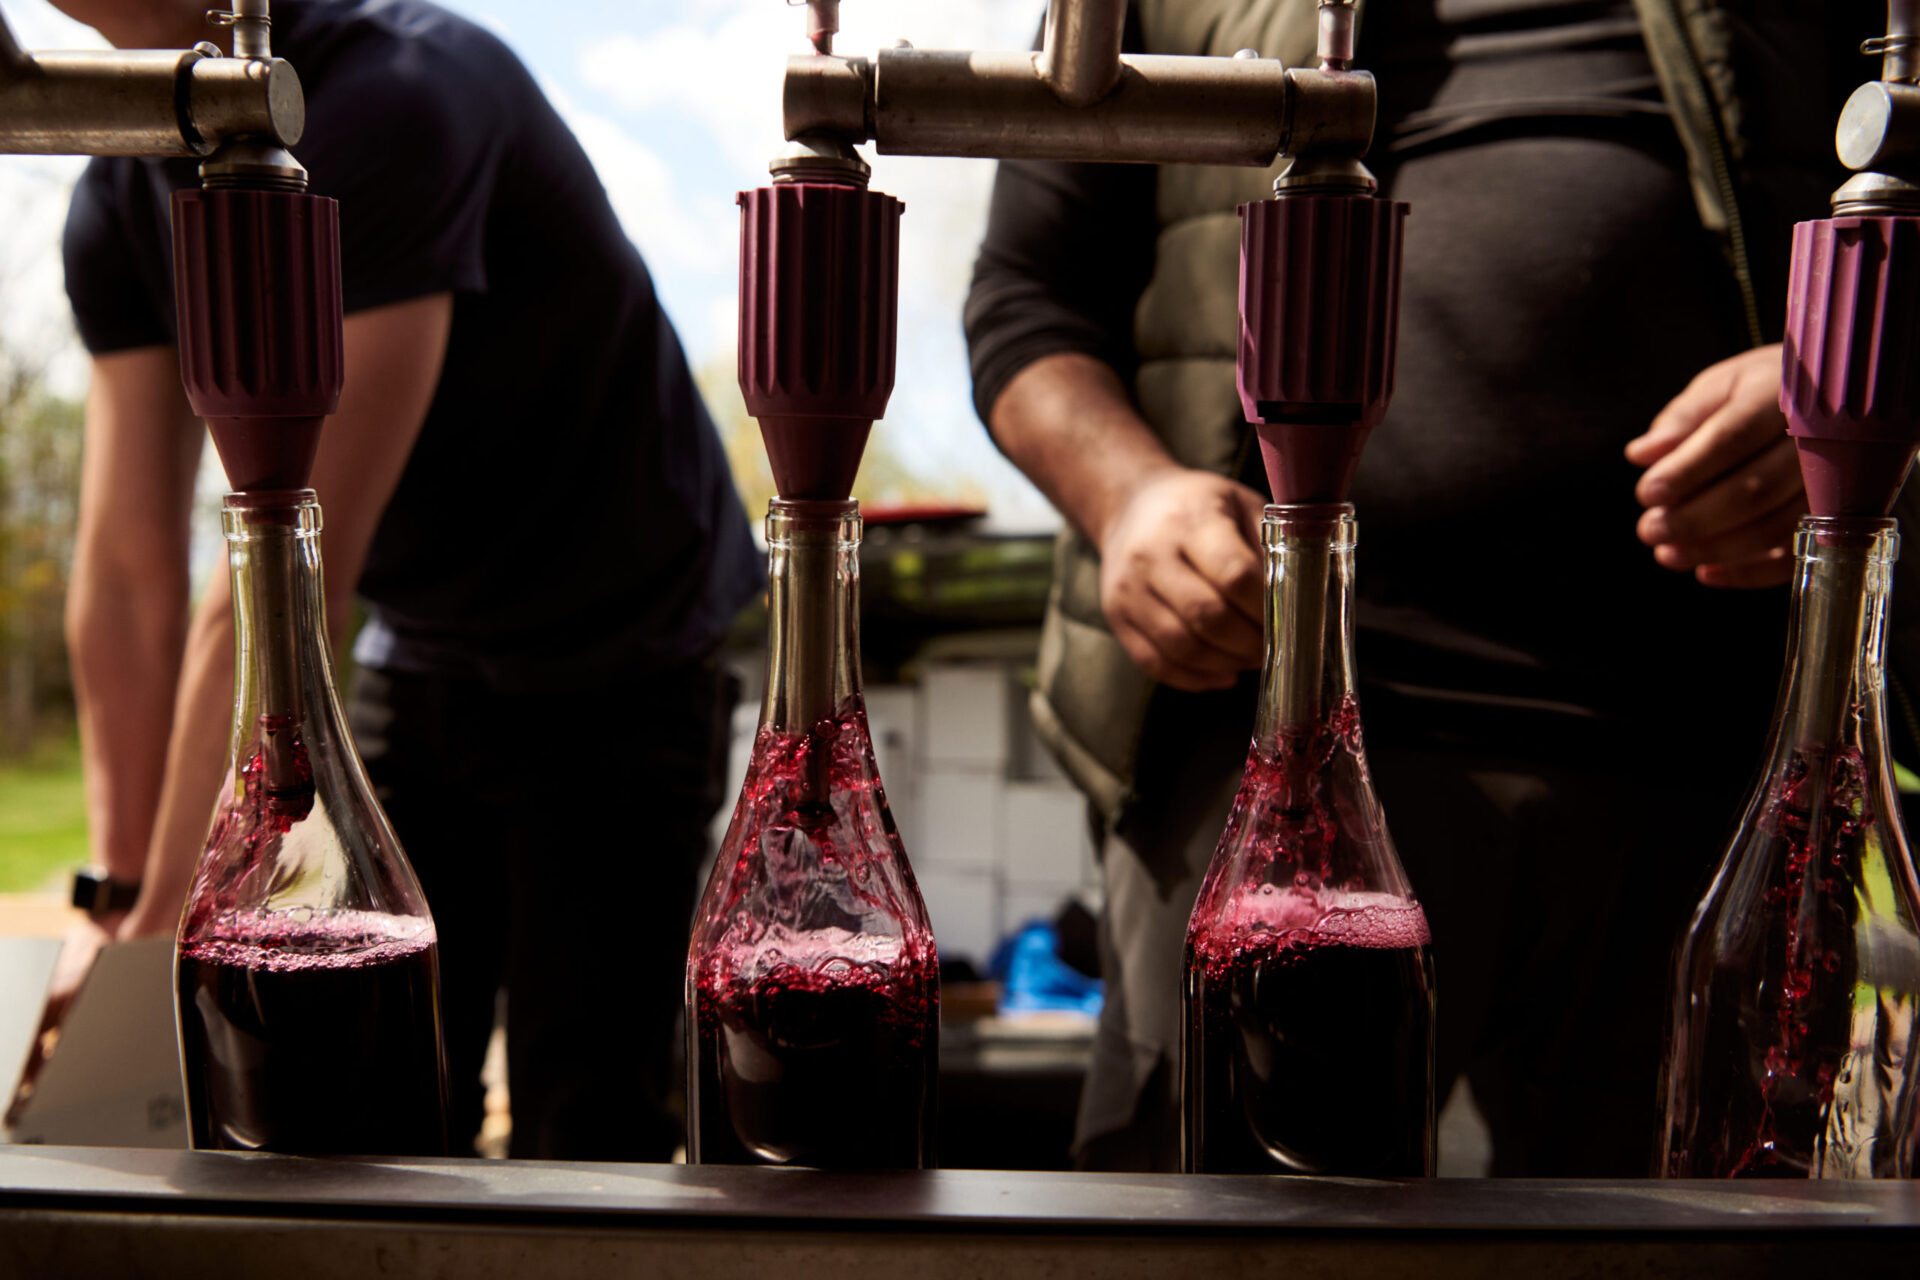 Good Goods' business model is built on sanitizing and re-filling used wine bottles in an effort to reduce waste. / Photo Courtesy Good Goods